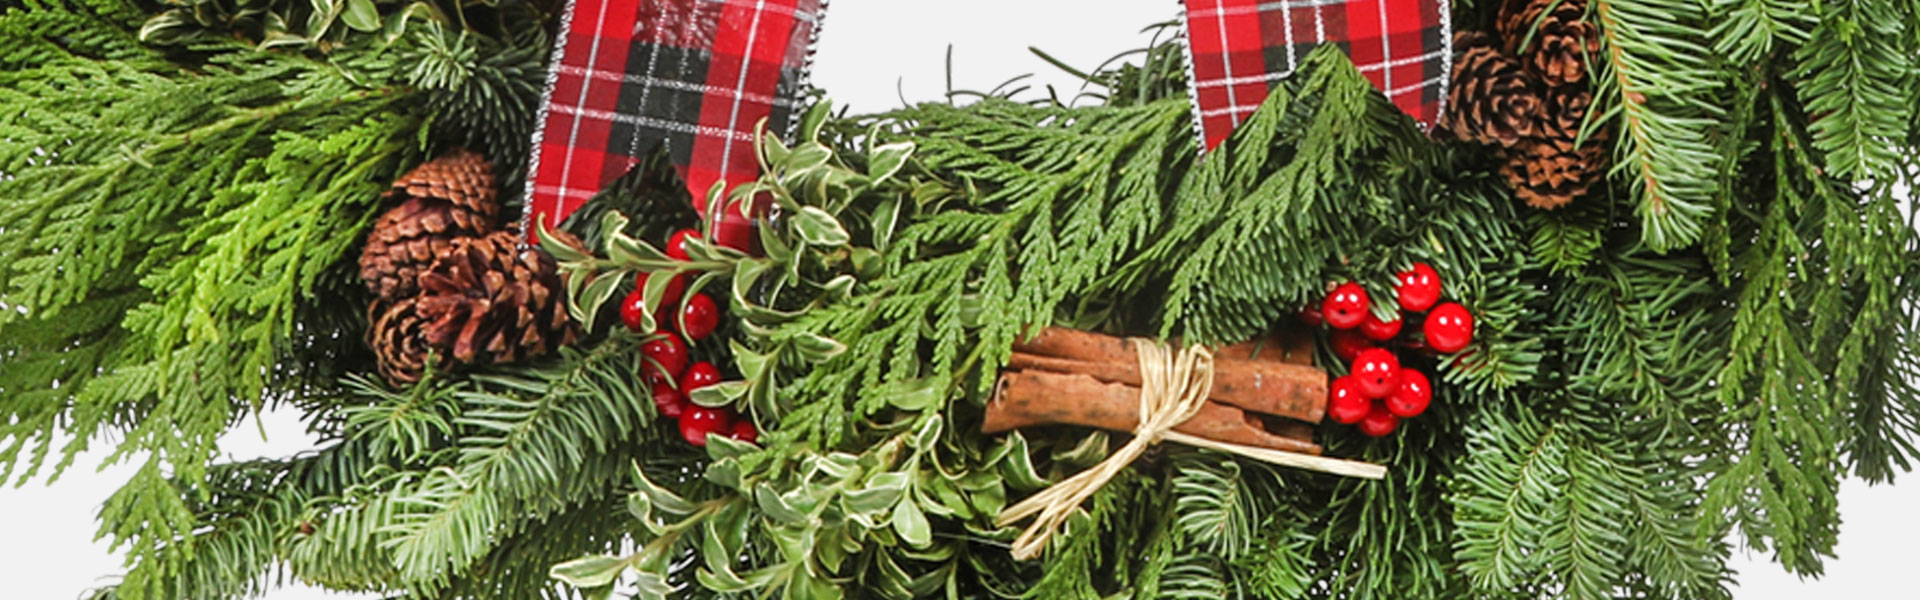 A Guide to Caring for Wreaths